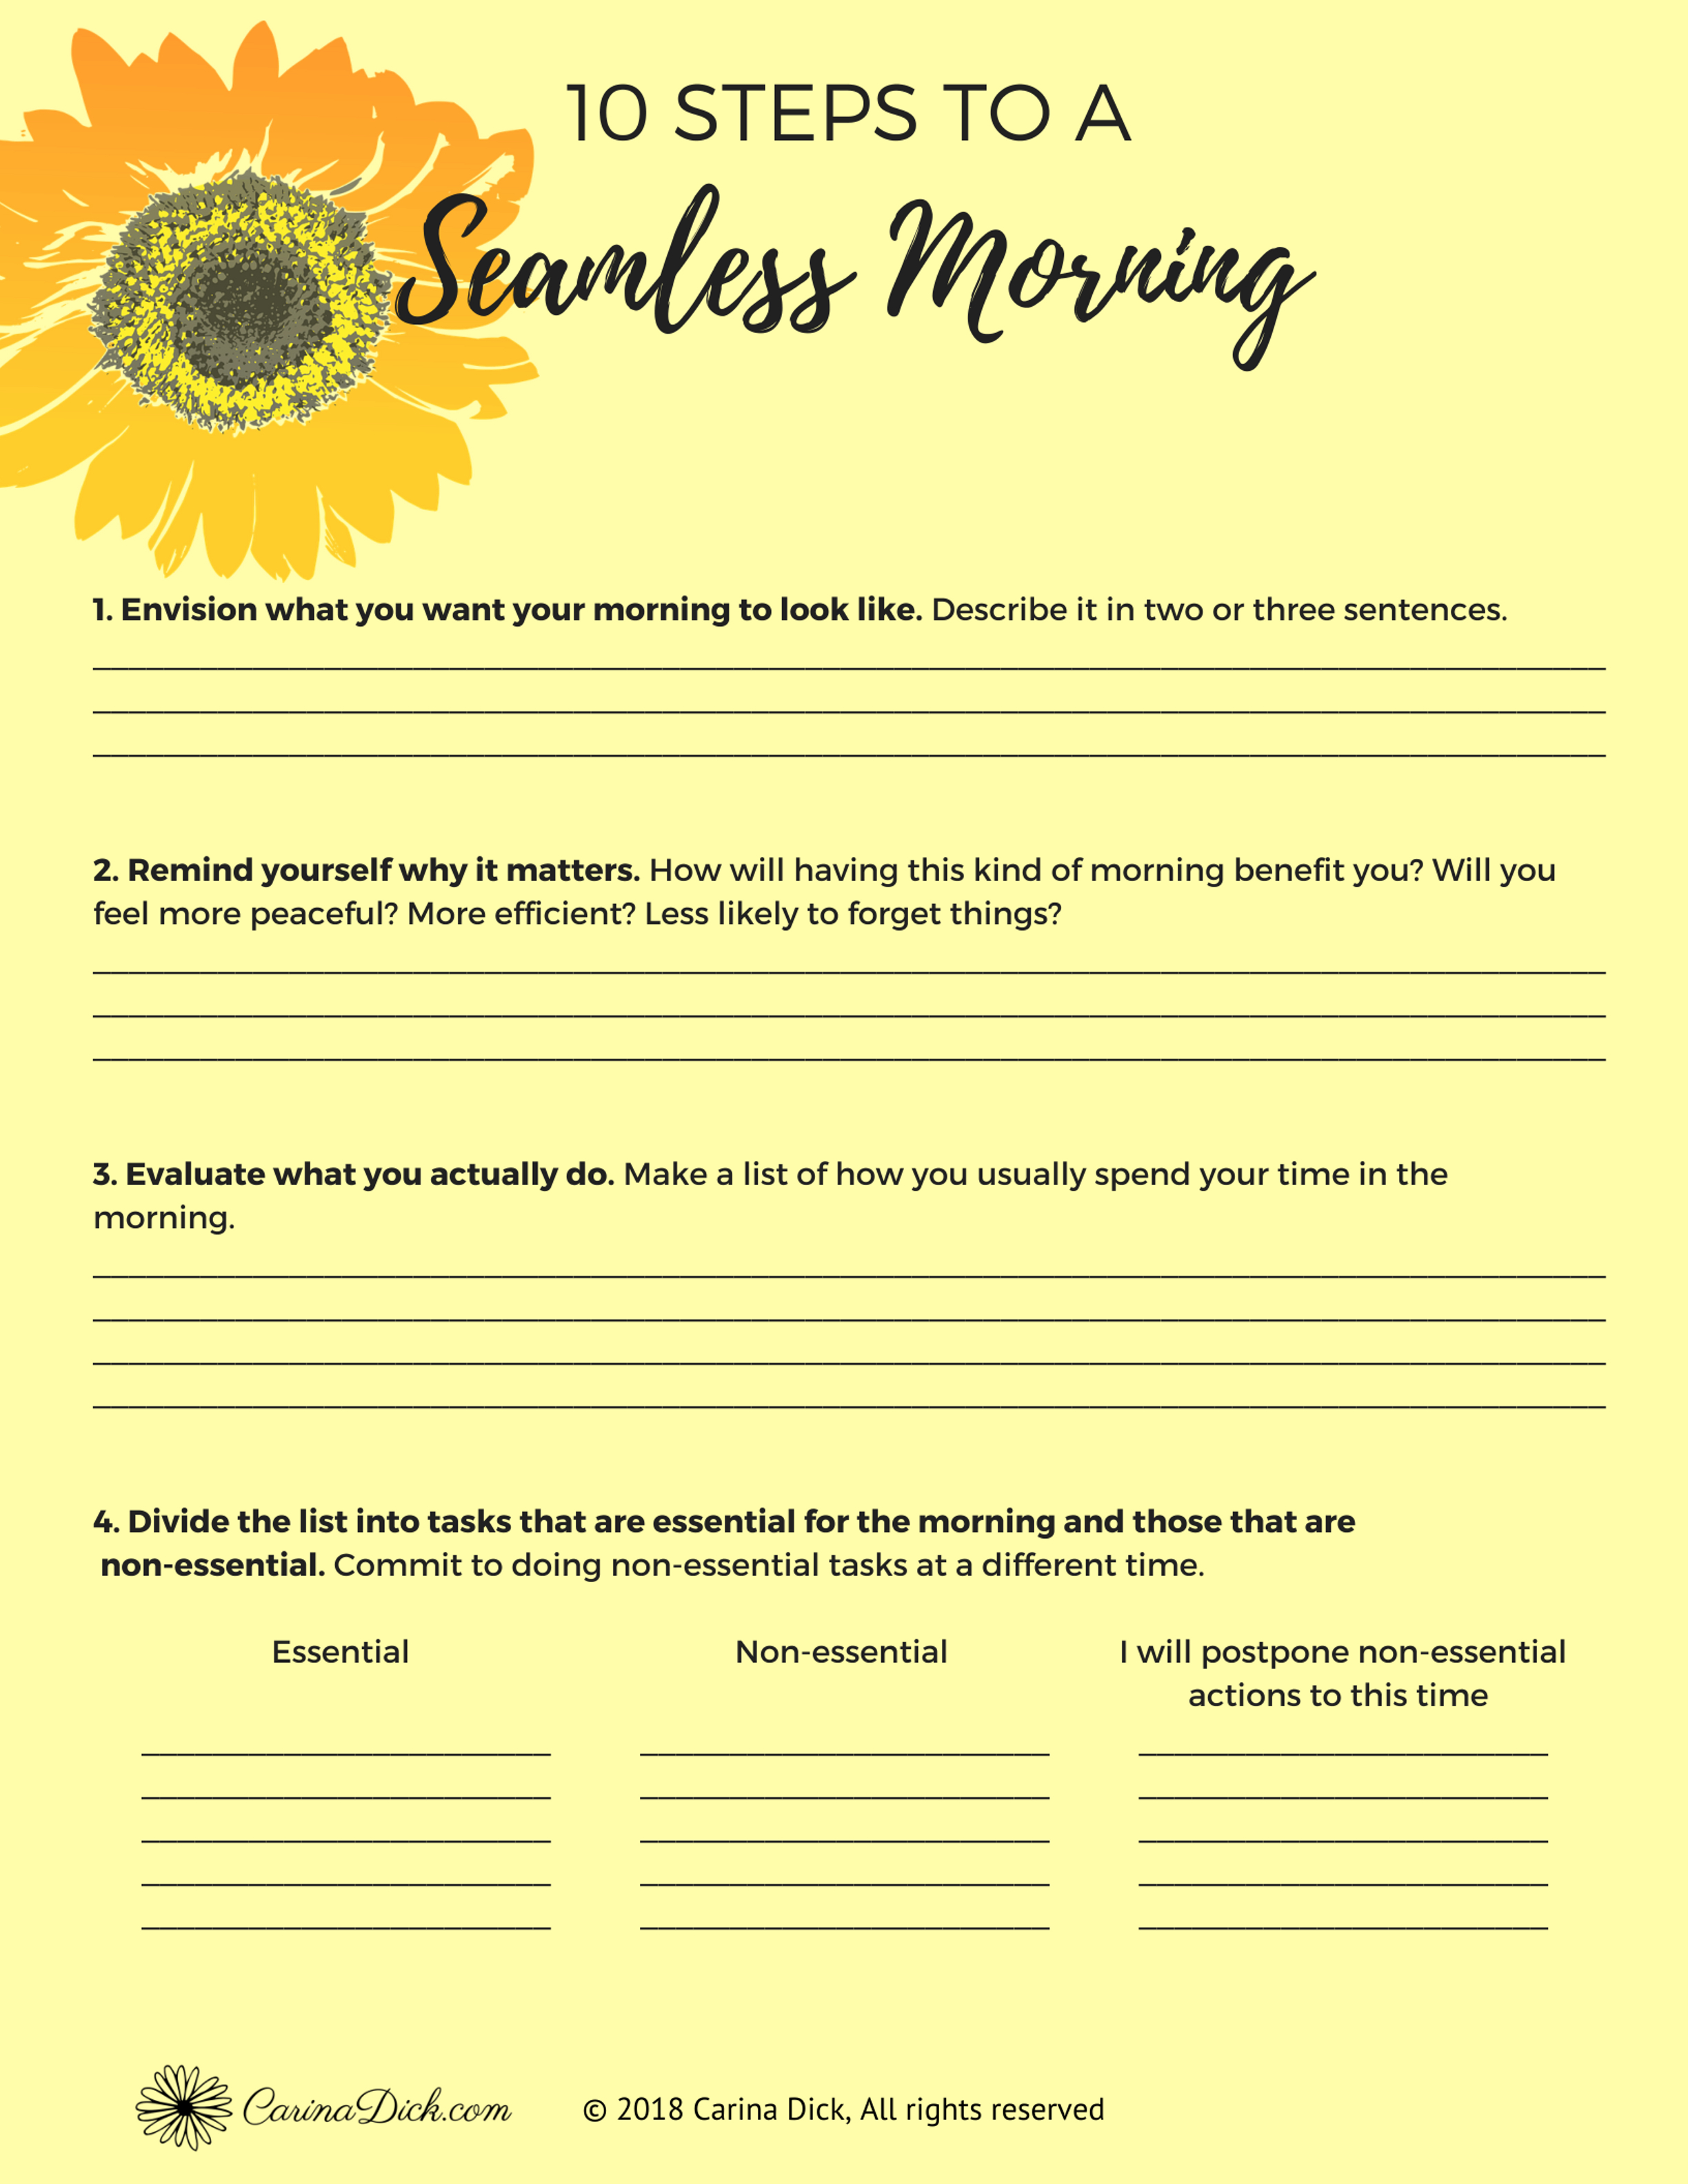 10 steps to a seamless morning.jpg